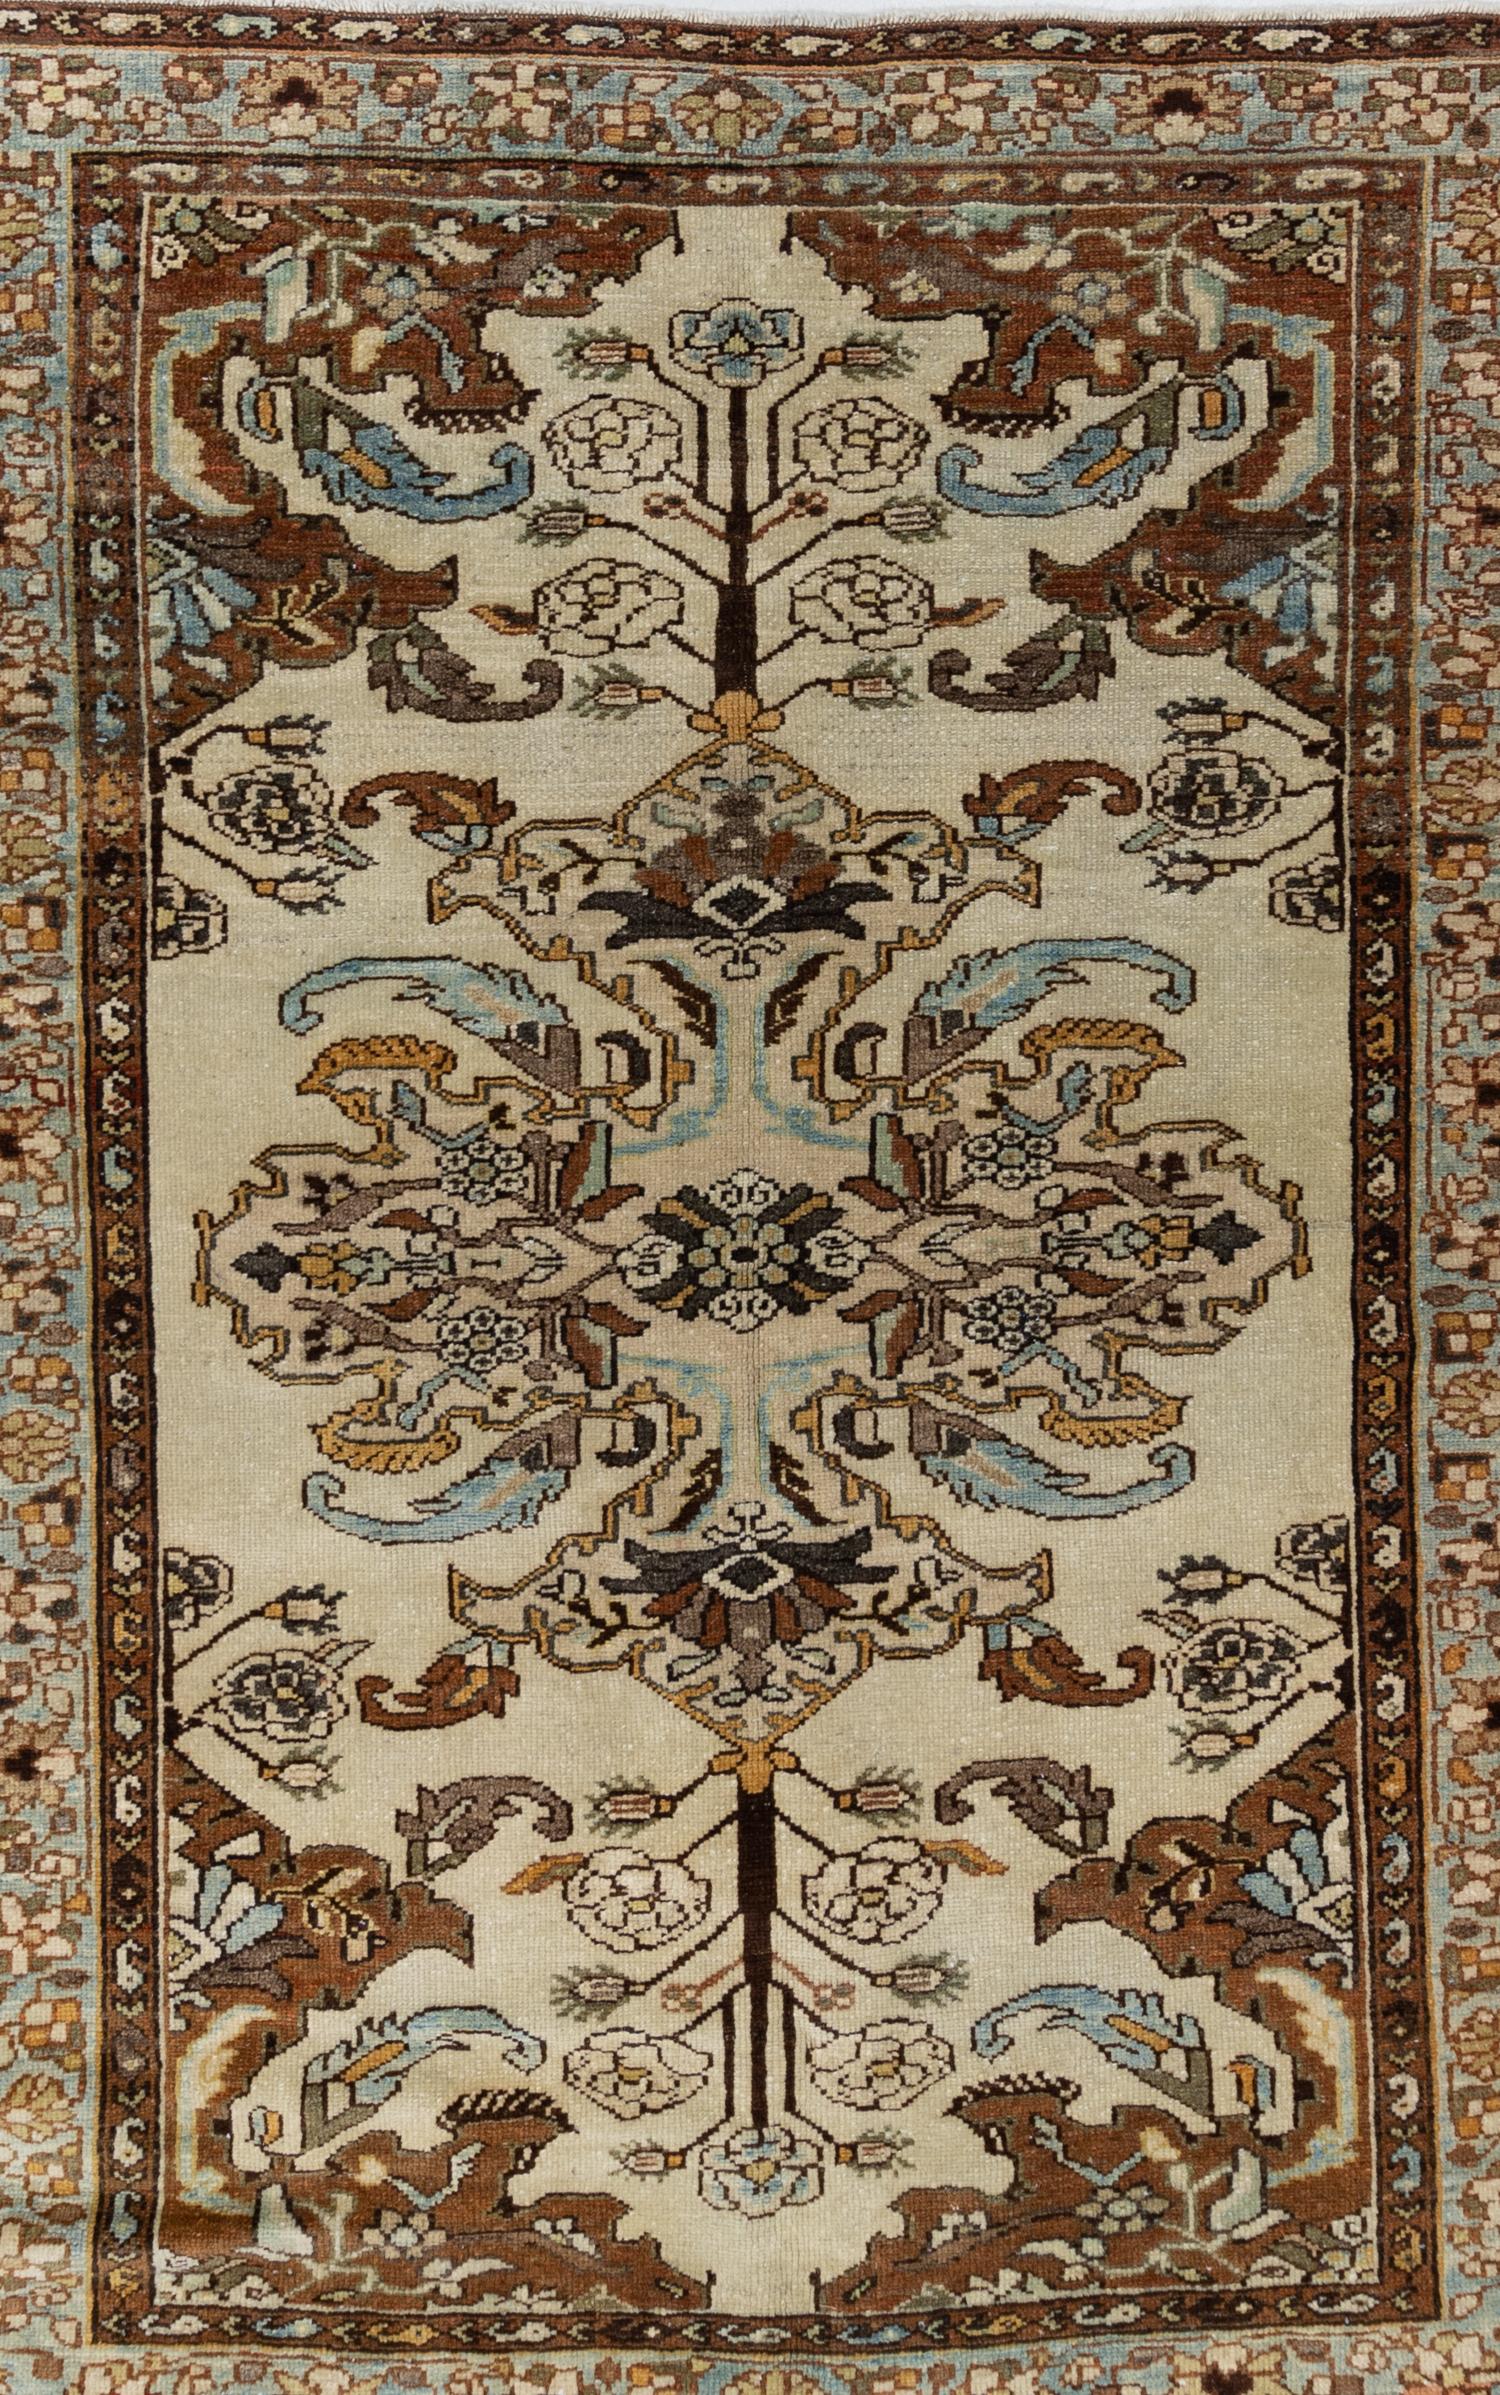 Beautiful vibrant earthy colors. traditional desig.

Wear Guide: 1

Wear Notes:
Vintage and antique rugs are by nature, pre-loved and may show evidence of their past. There are varying degrees of wear to vintage rugs; some show very little and